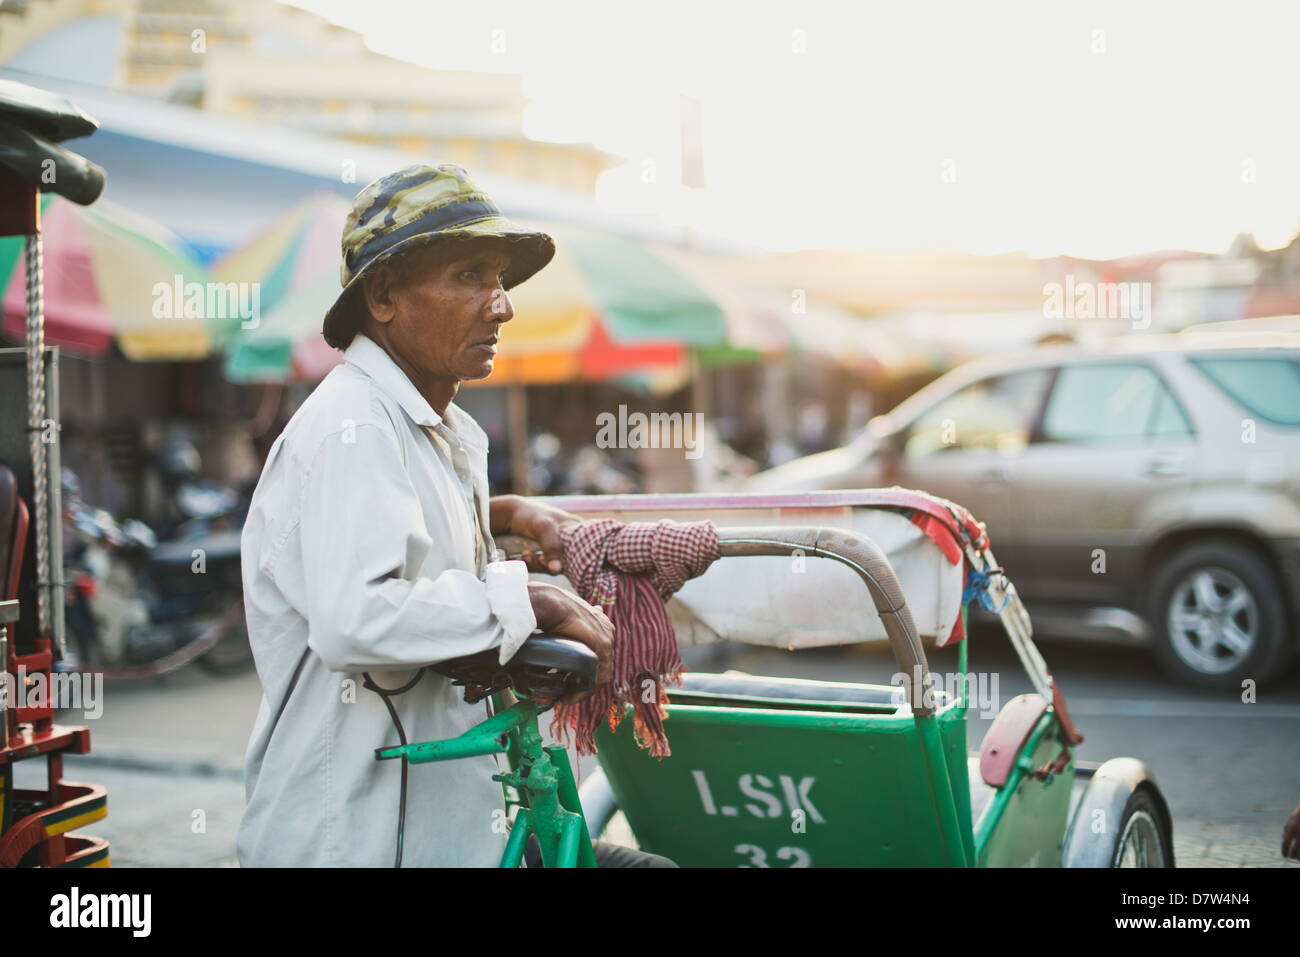 A cyclo driver waiting for customers, transportation in Cambodia Stock Photo